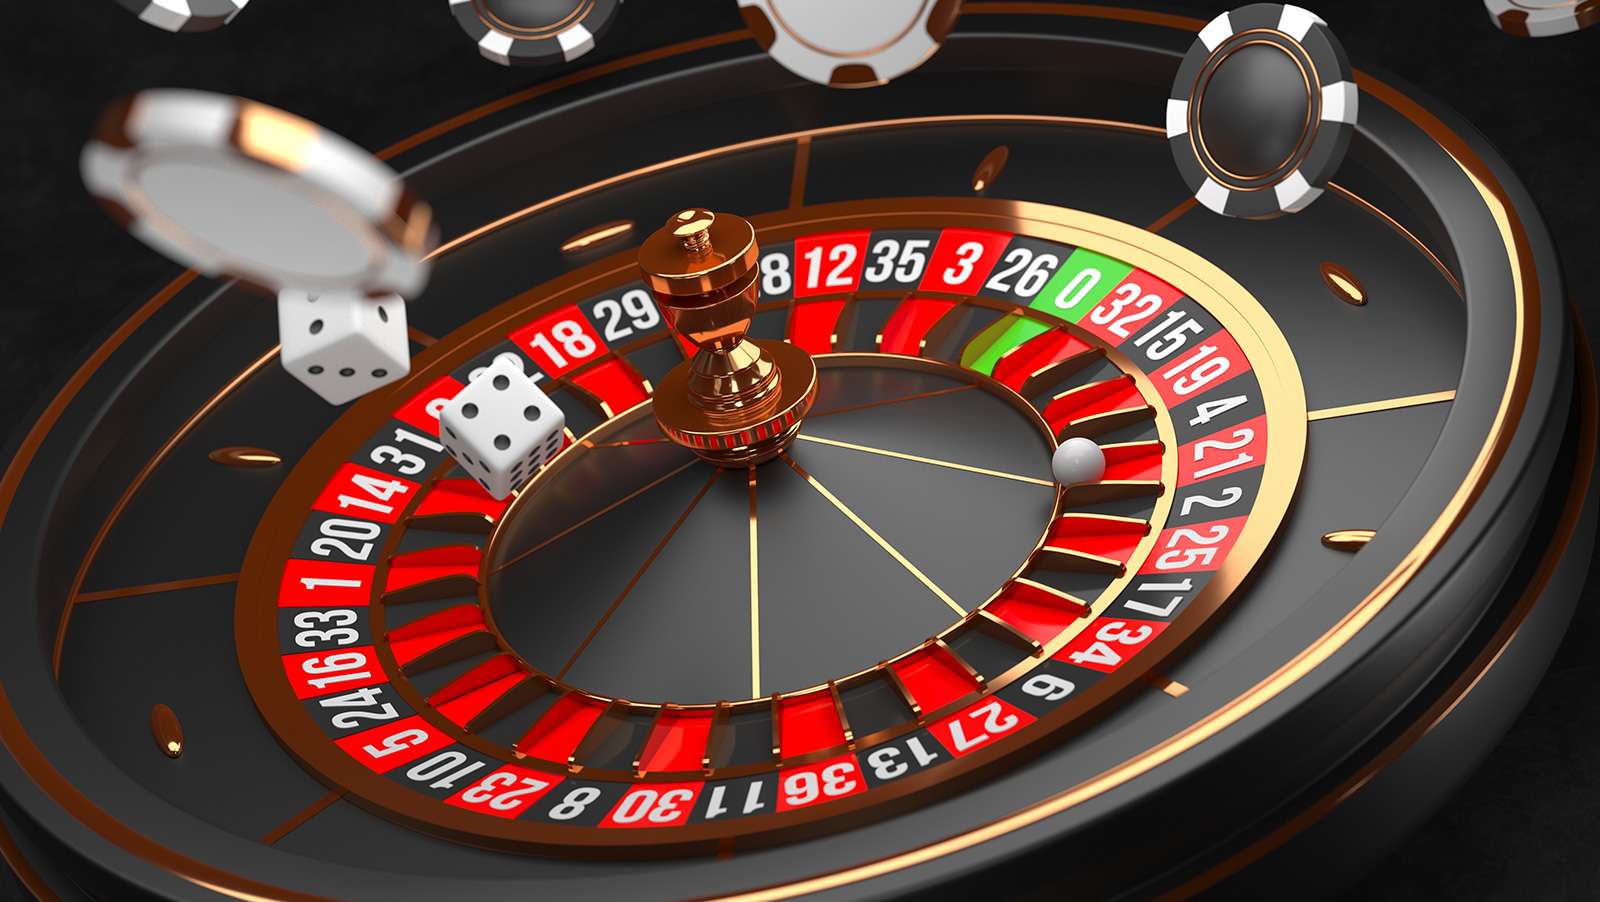 How To Play Online Casino In Nepal